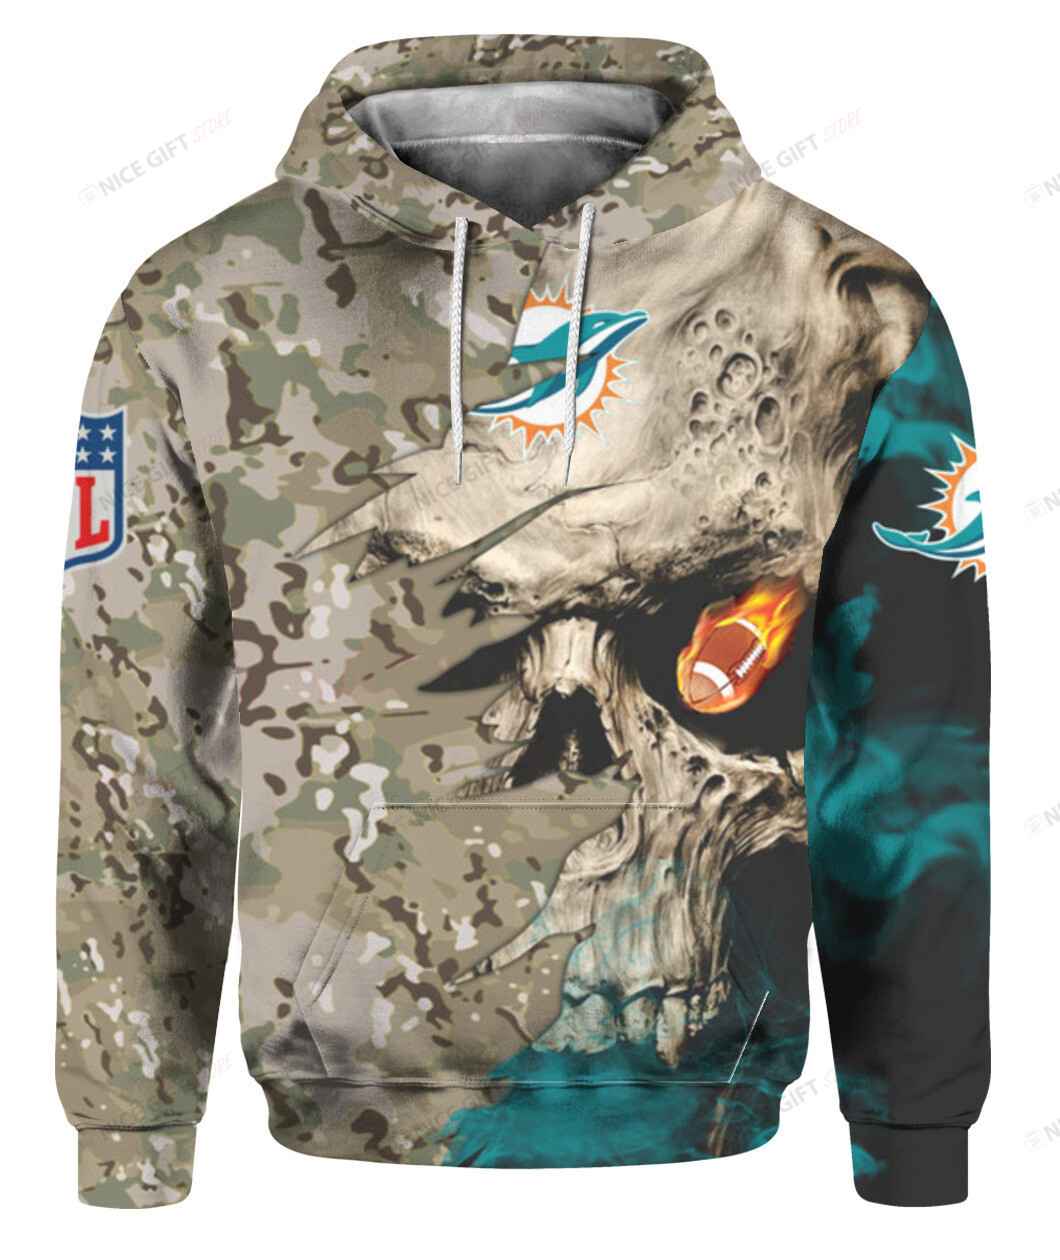 NFL Miami Dolphins Camouflage Hoodie 3D 3HO-N5G2 - HomeFavo